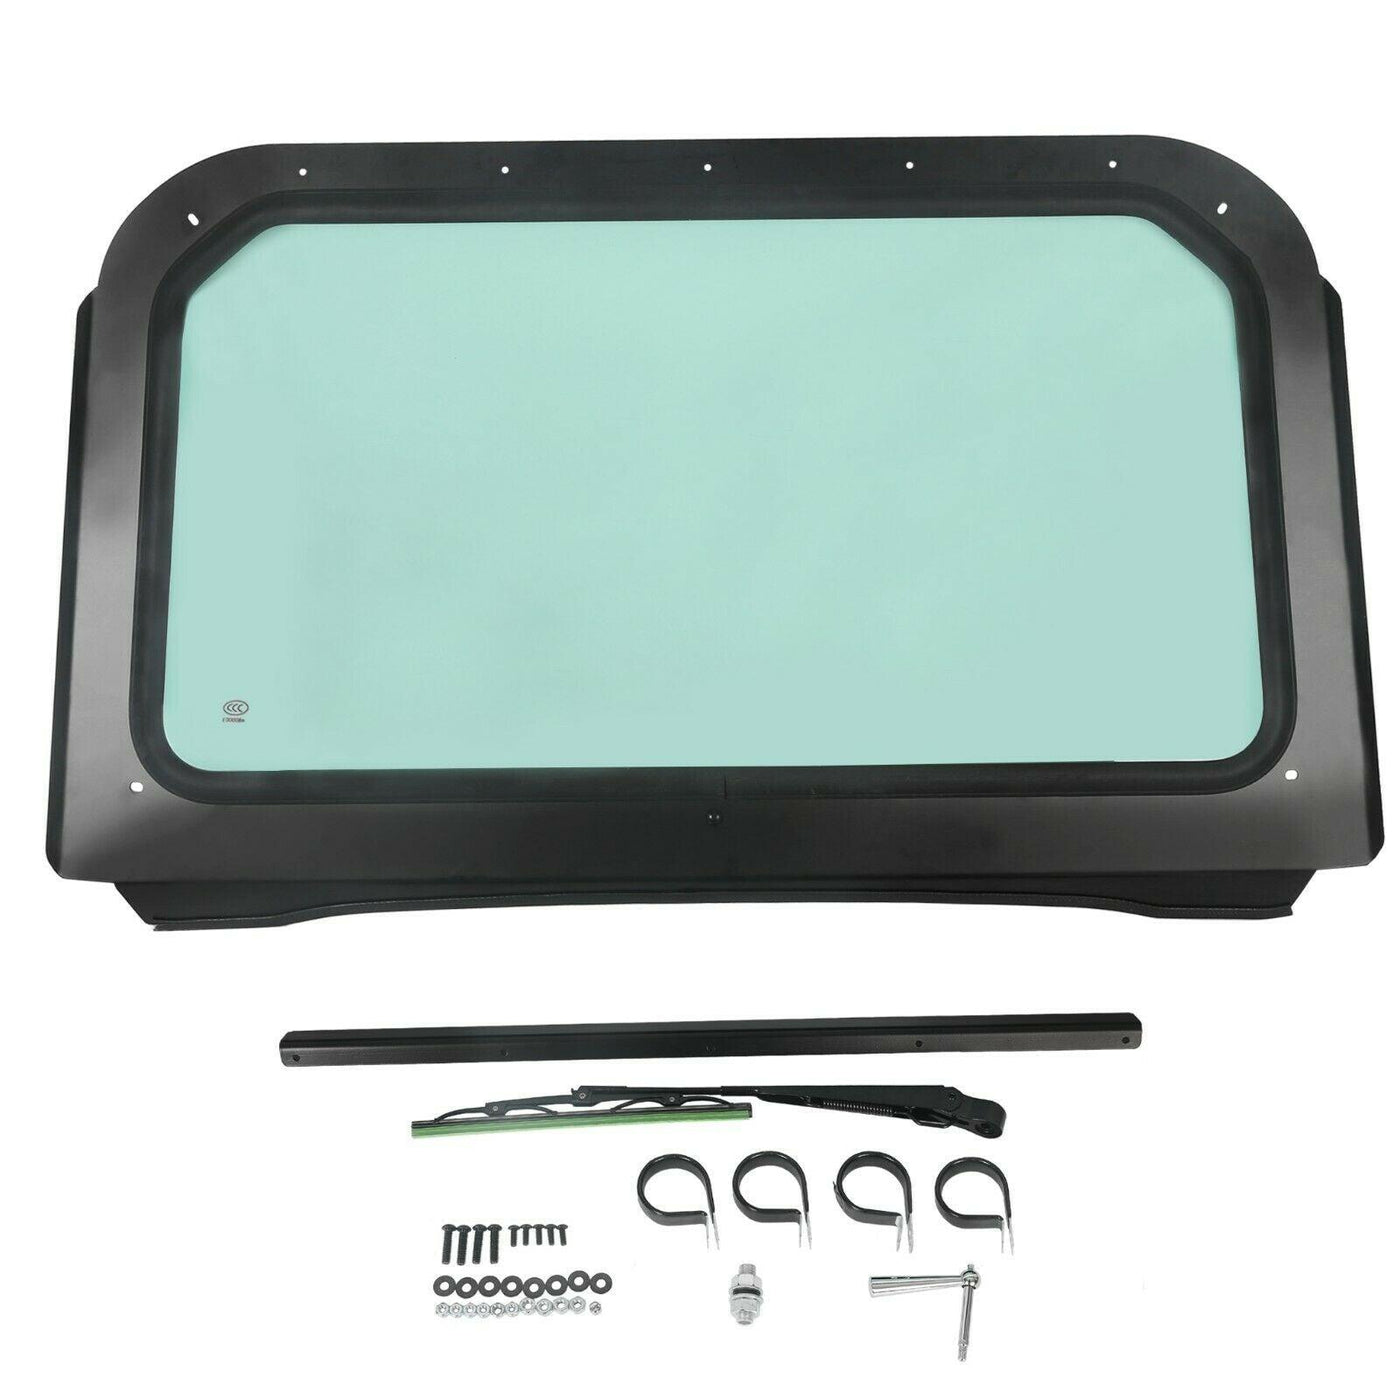 Full Glass Windshield With Wiper Black For Polaris 08-14 RZR 570 800 XP 900 - Moto Life Products